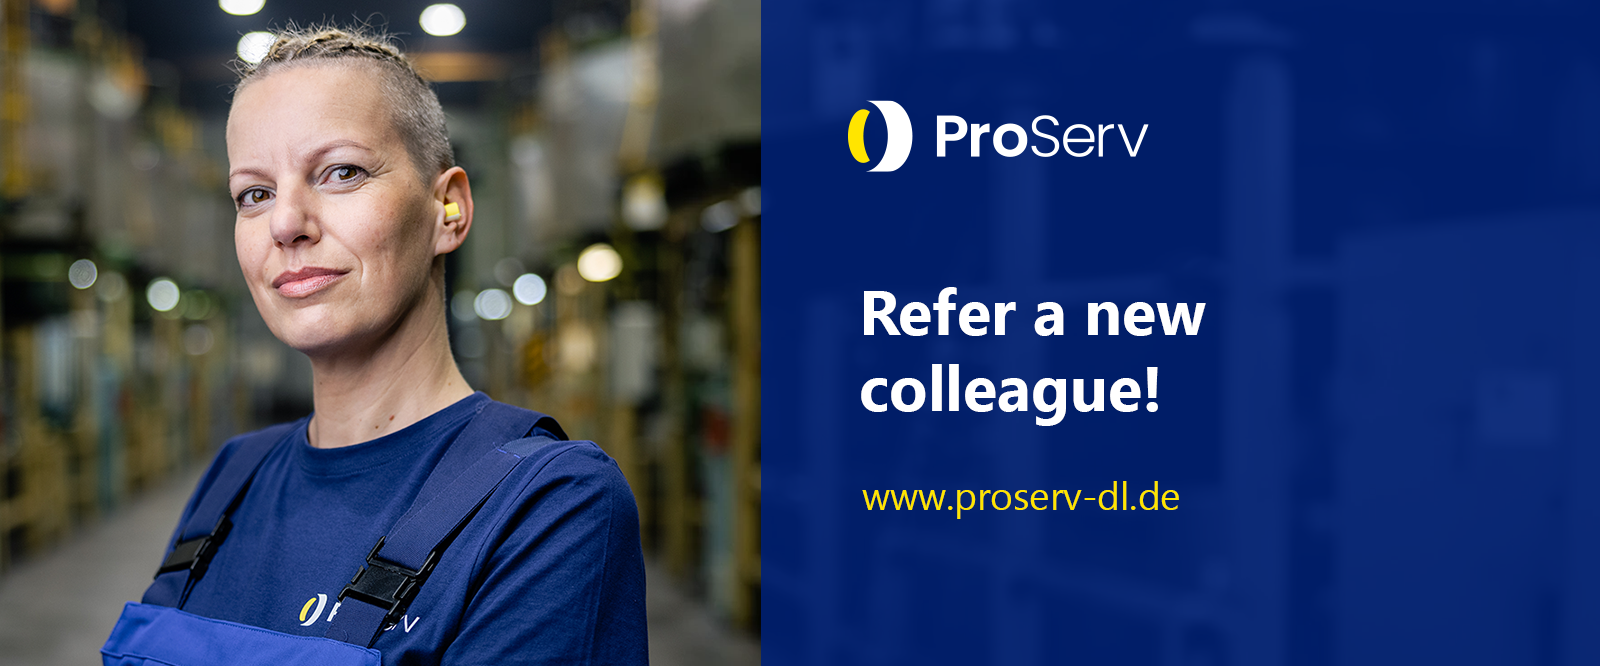 Refer a new colleague!